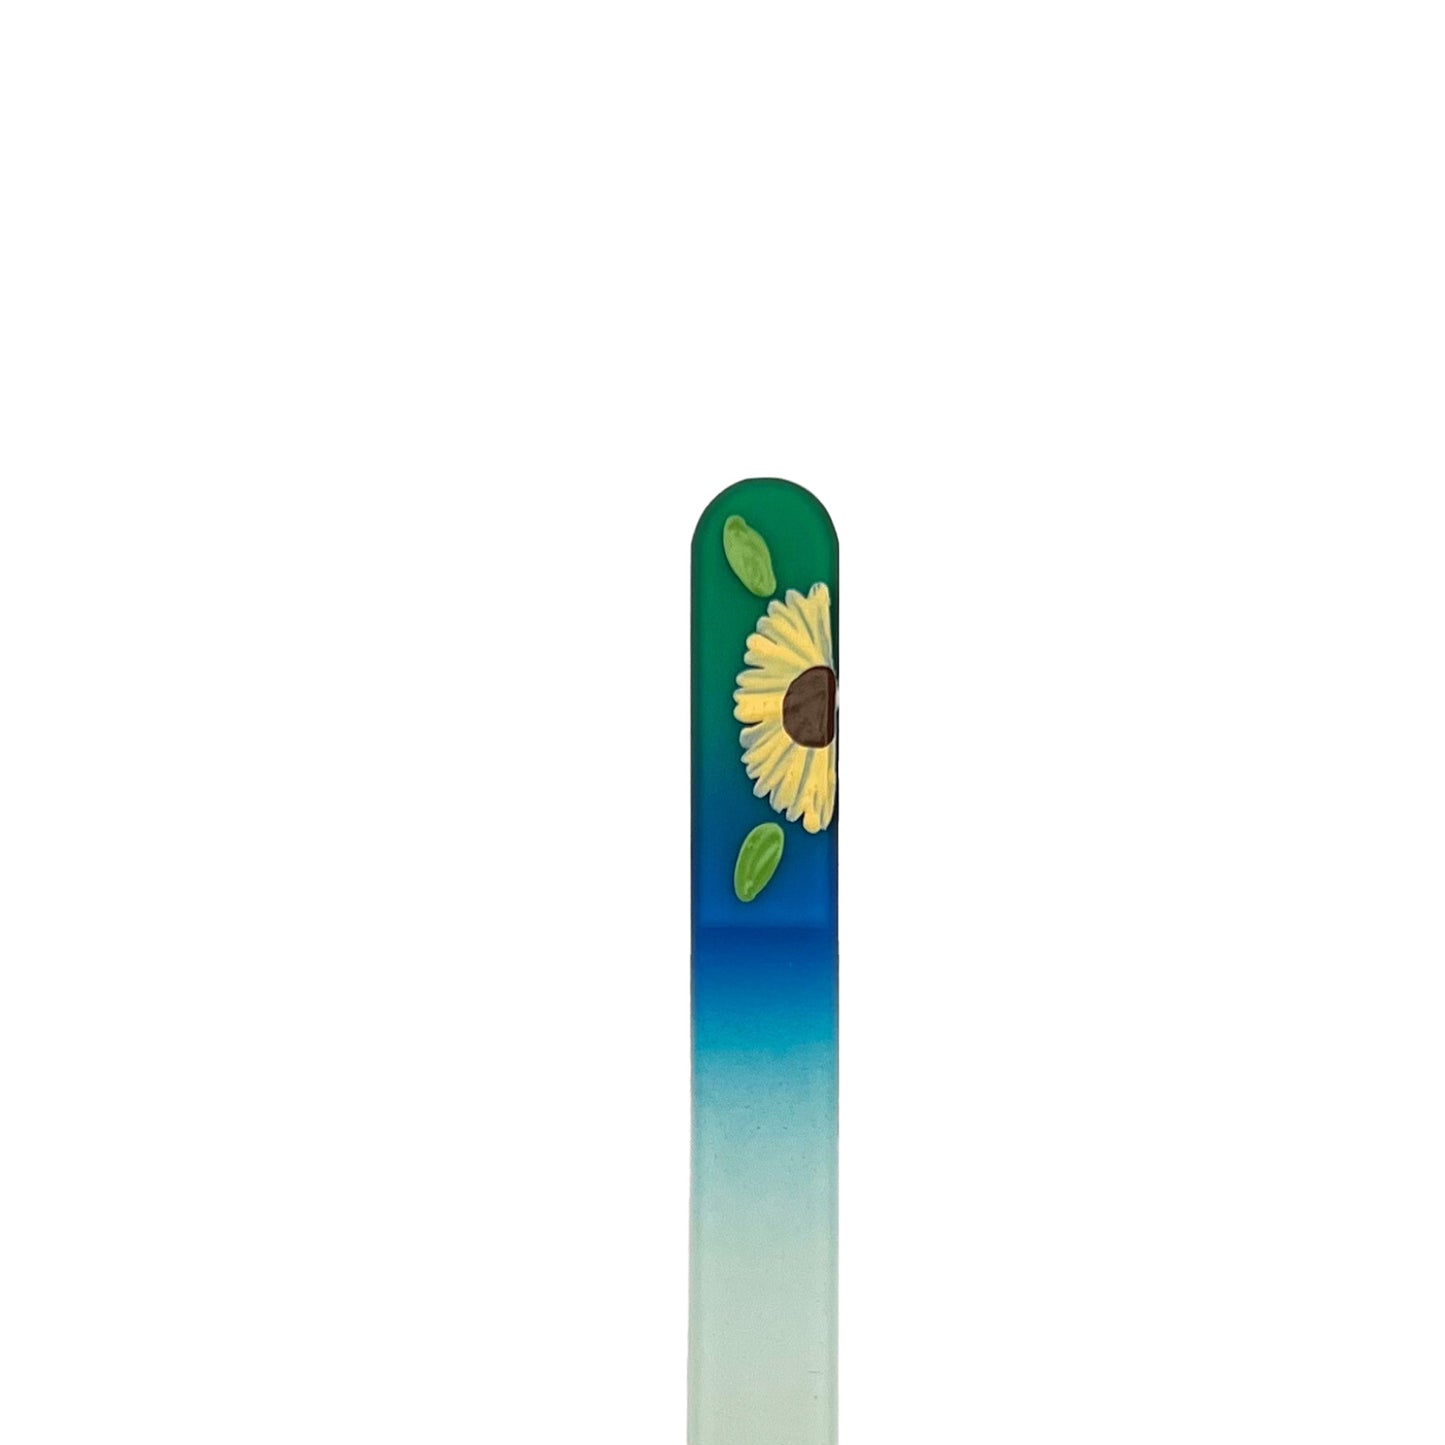 green and blue glass nail file with hand painted sunflower.